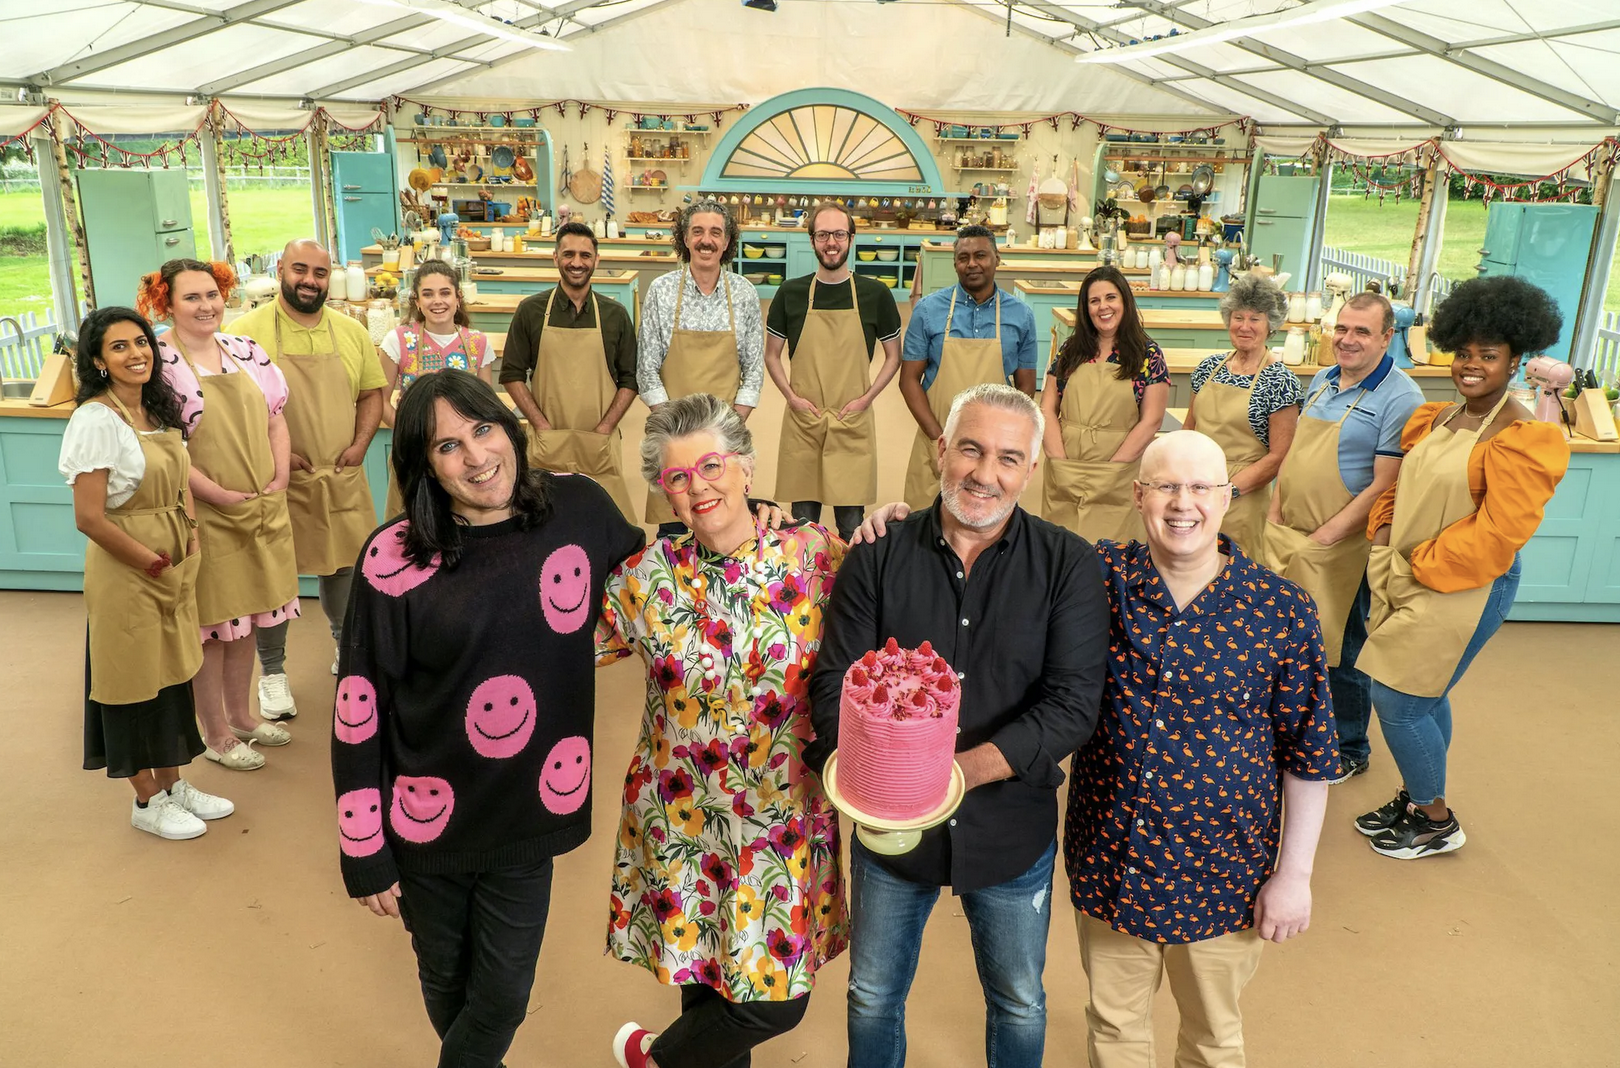 A group portrait of the Great British Bake-Off season 12 contestants, with judges Paul Hollywood and Prue Leith in front alongside hosts Matt Lucas and Noel Fielding. Hollywood holds a big pink layer cake.